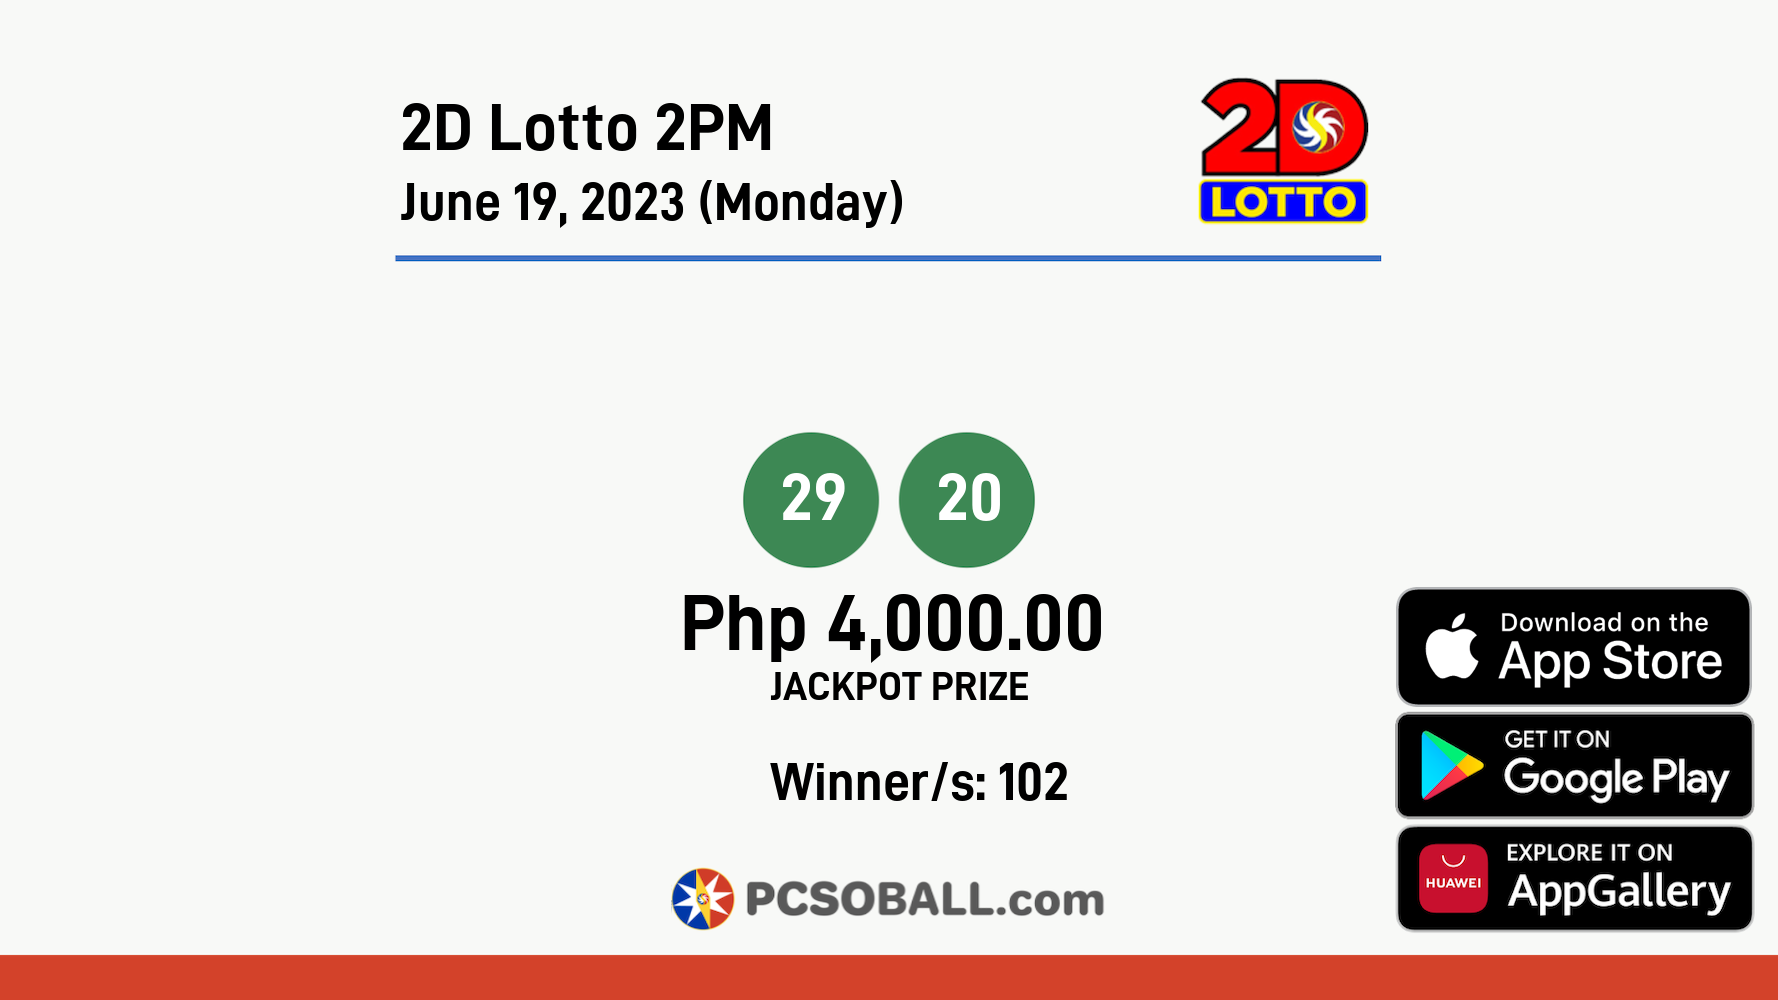 2D Lotto 2PM June 19, 2023 (Monday) Result